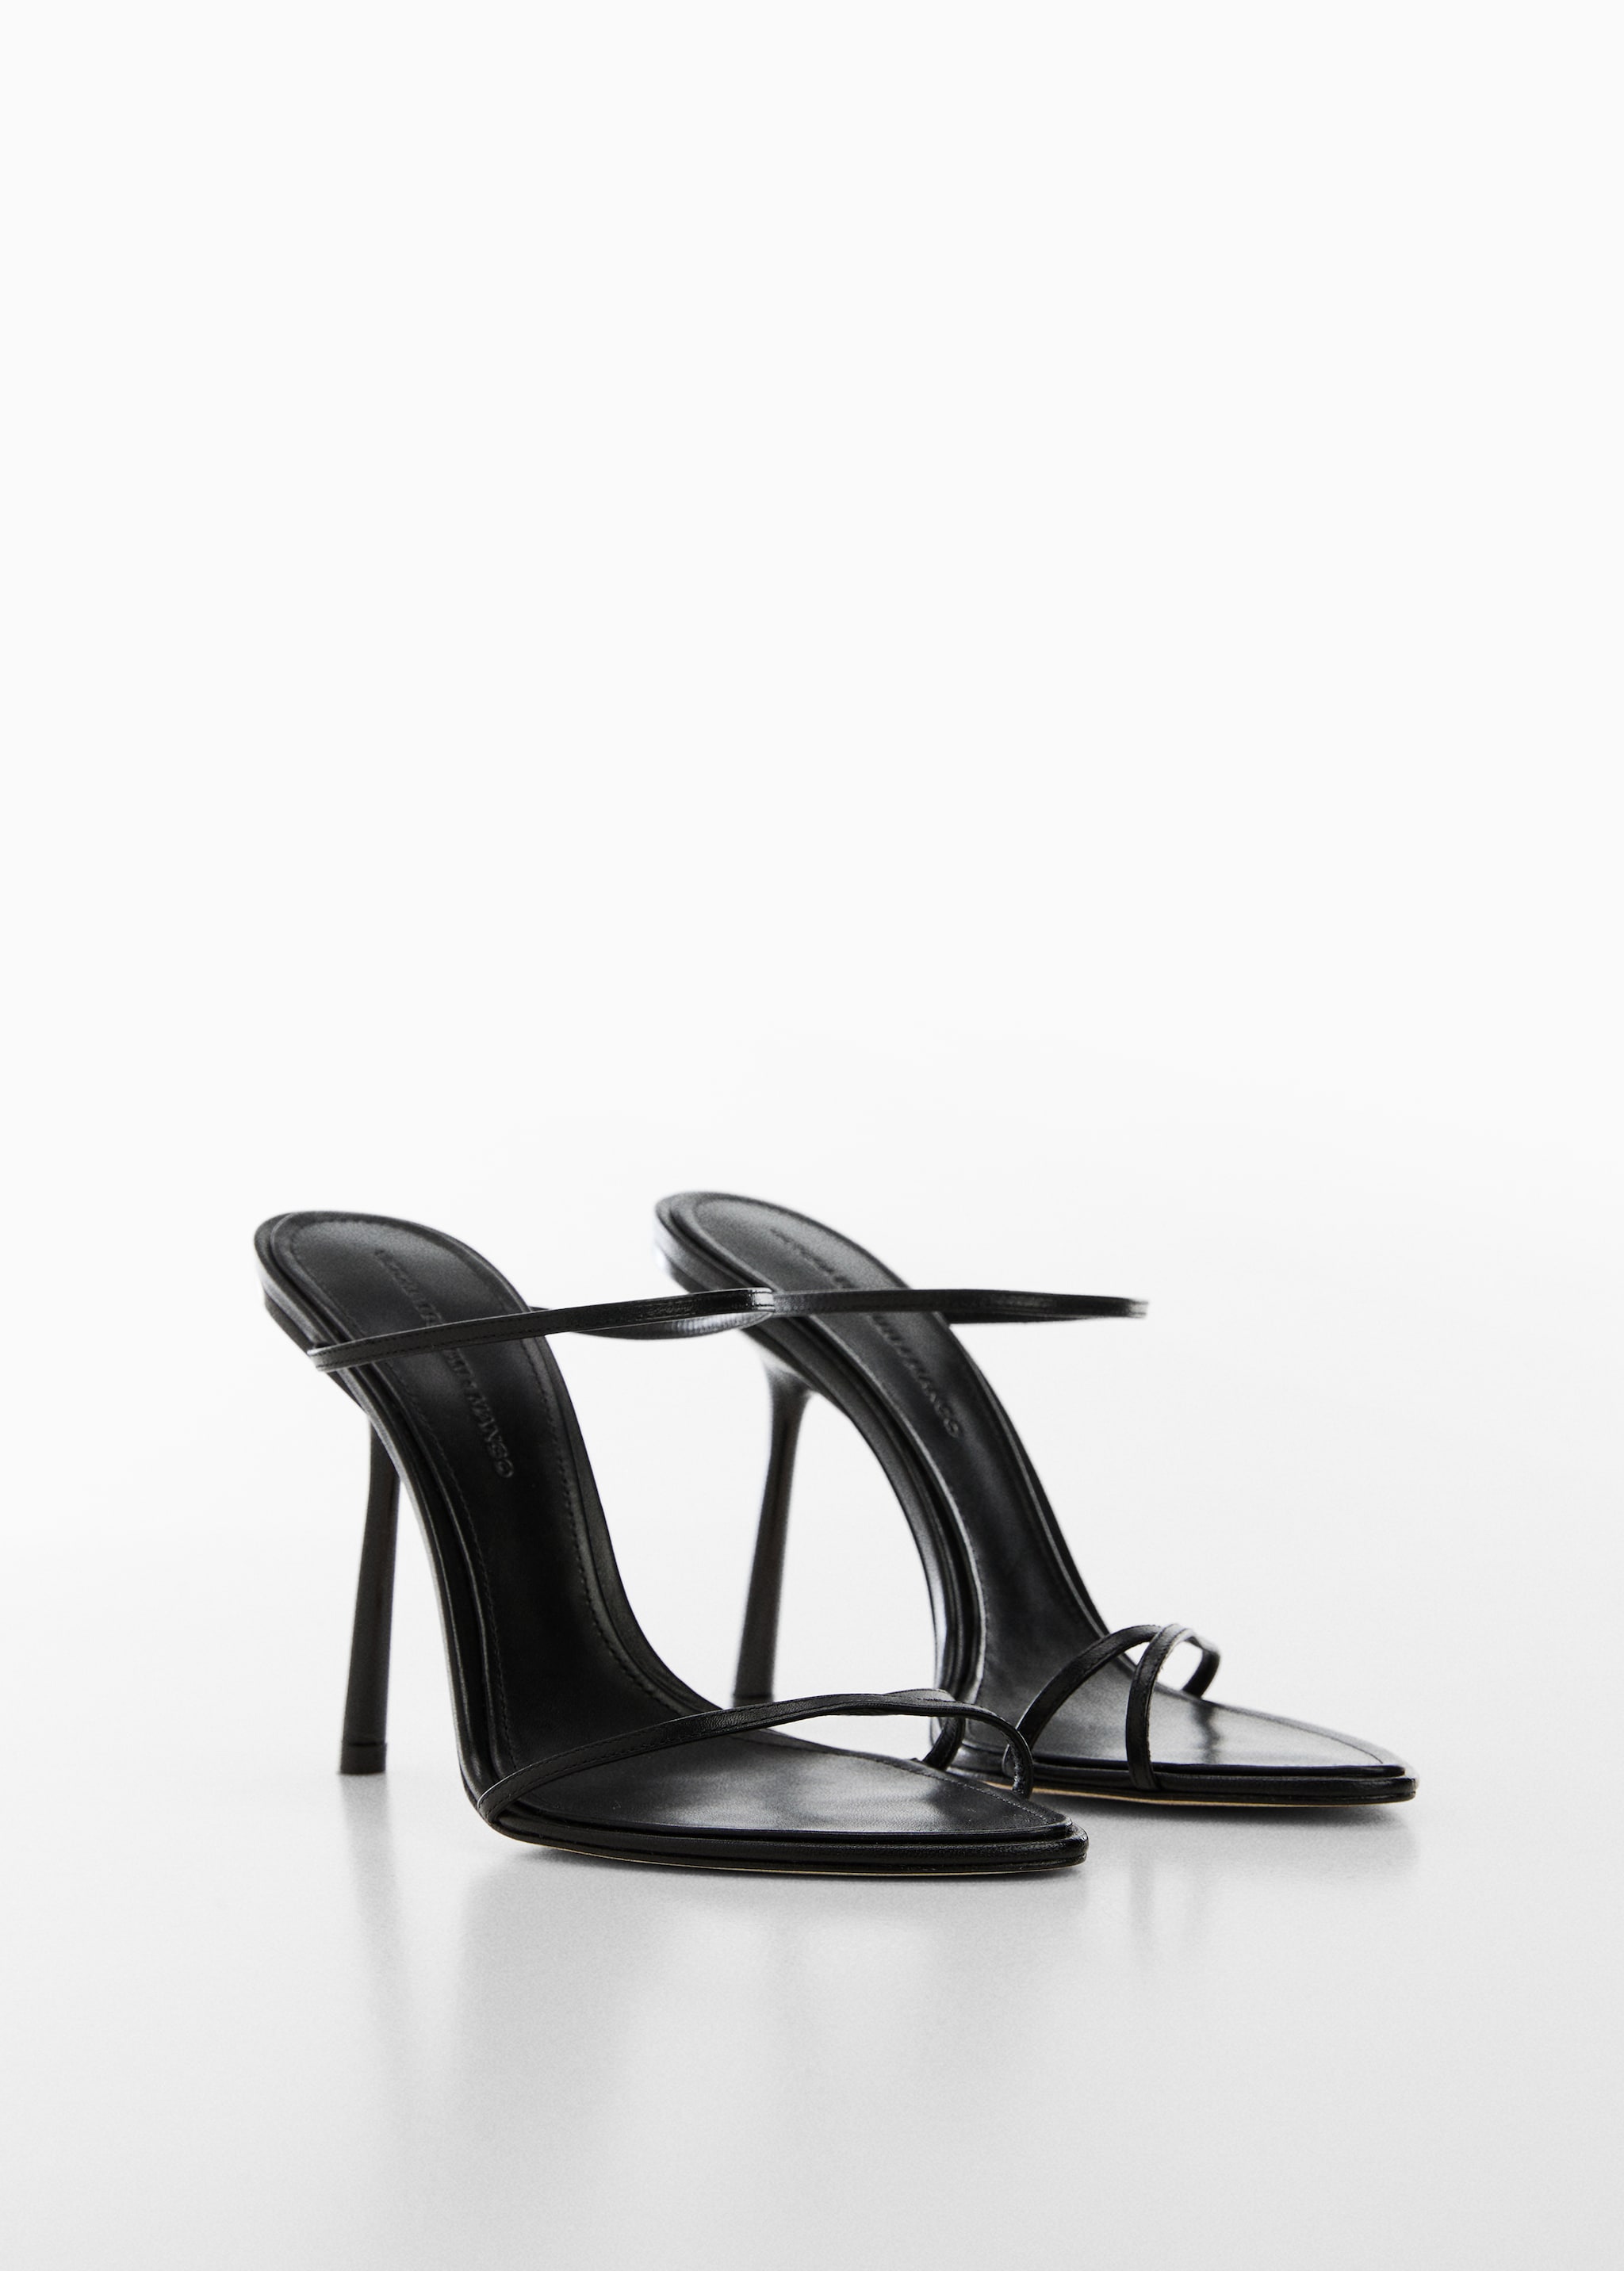 Leather sandal with inclined heel - Medium plane